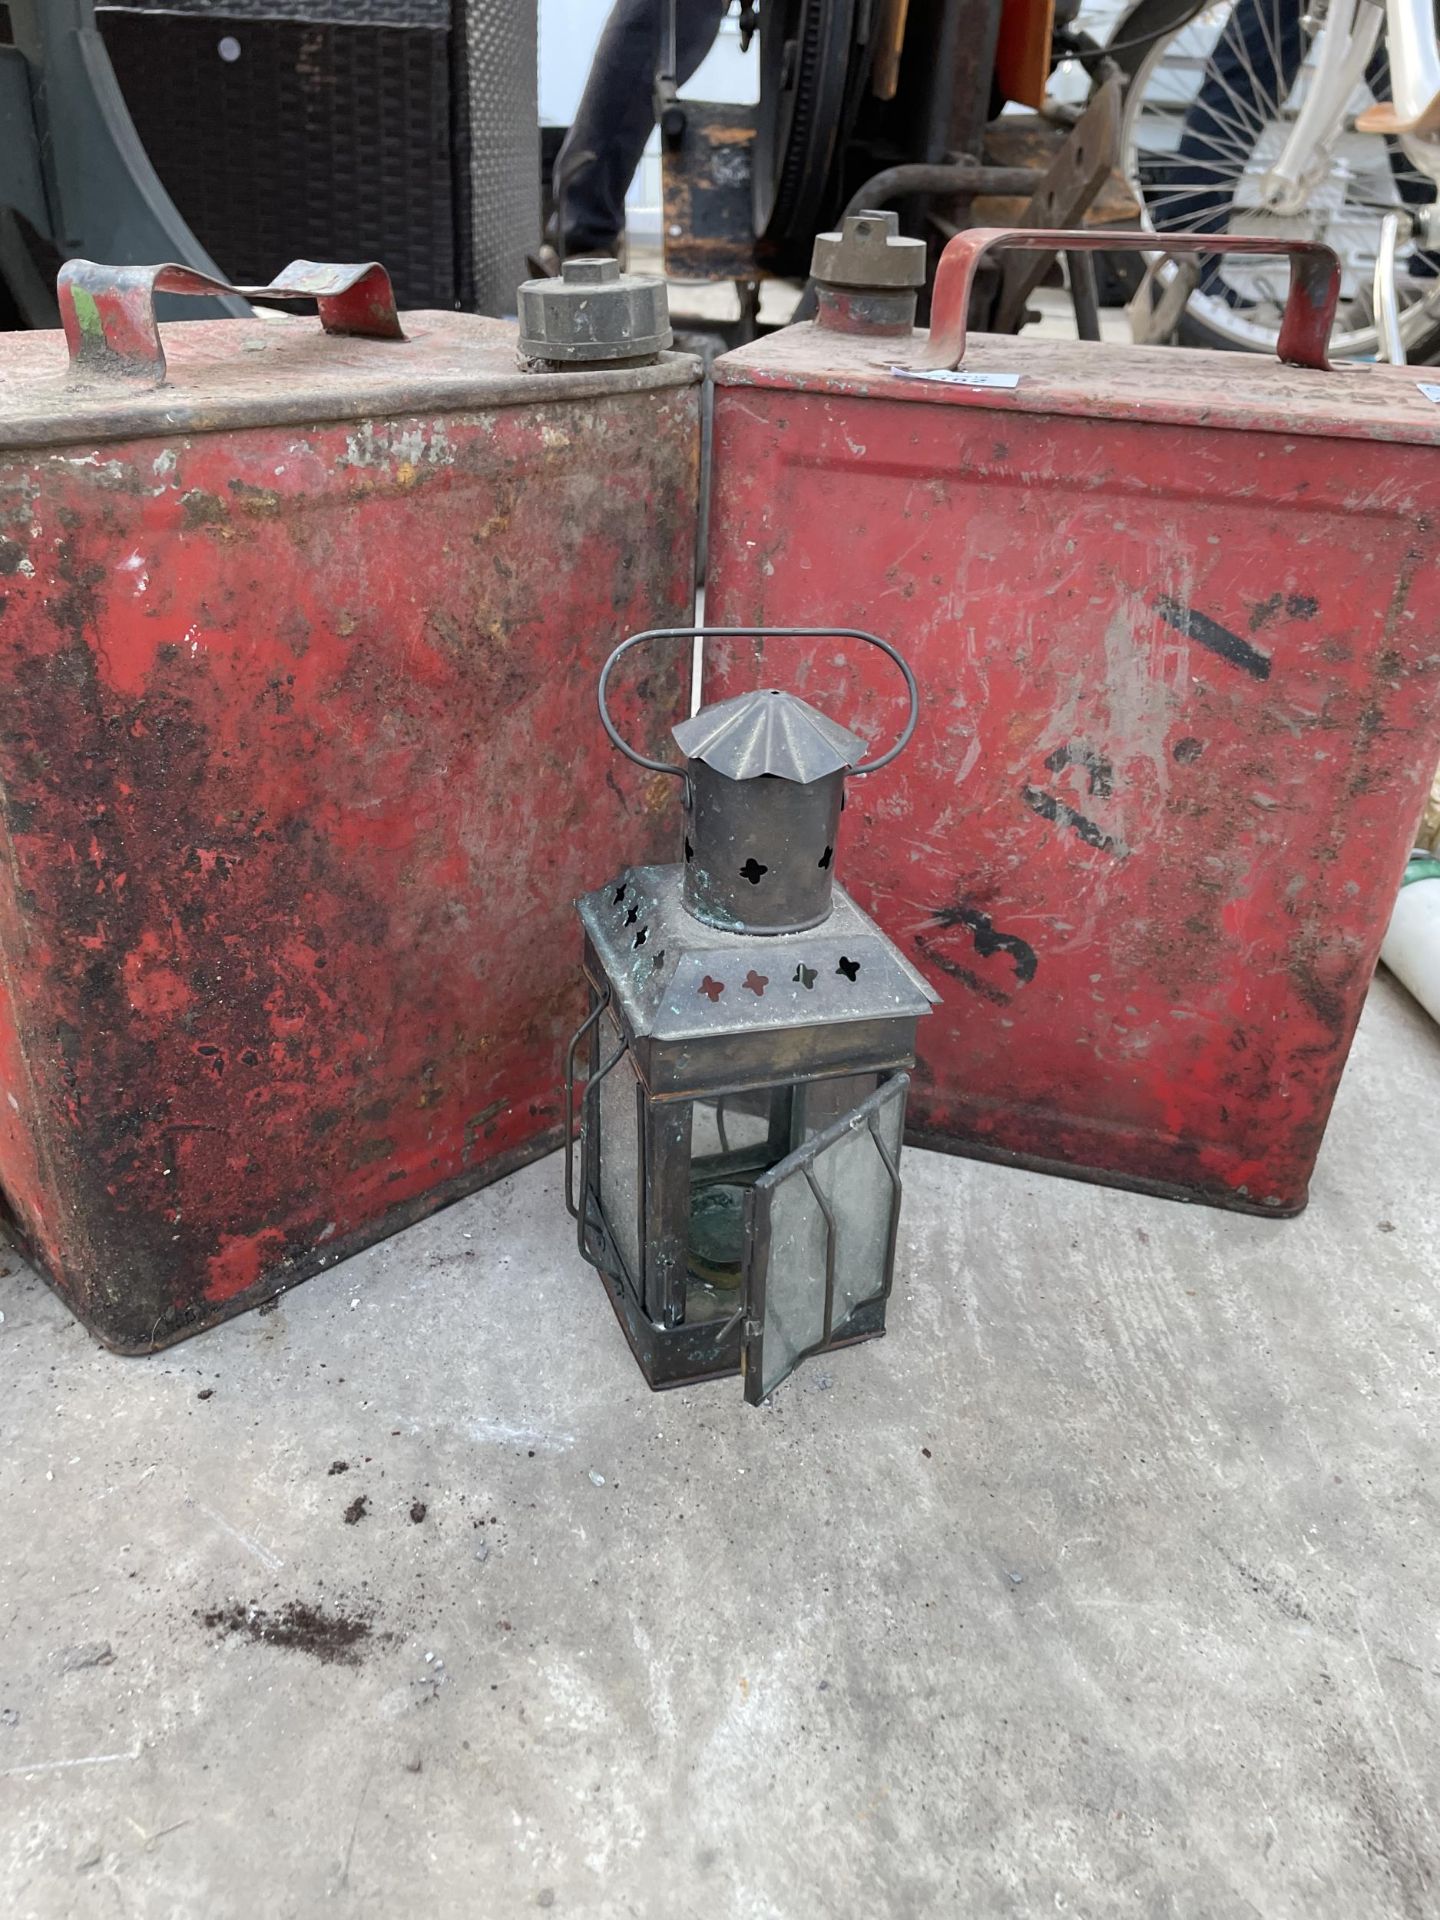 TWO VINTAGE FUEL CANS AND A CANDLE LANTERN - Image 2 of 2